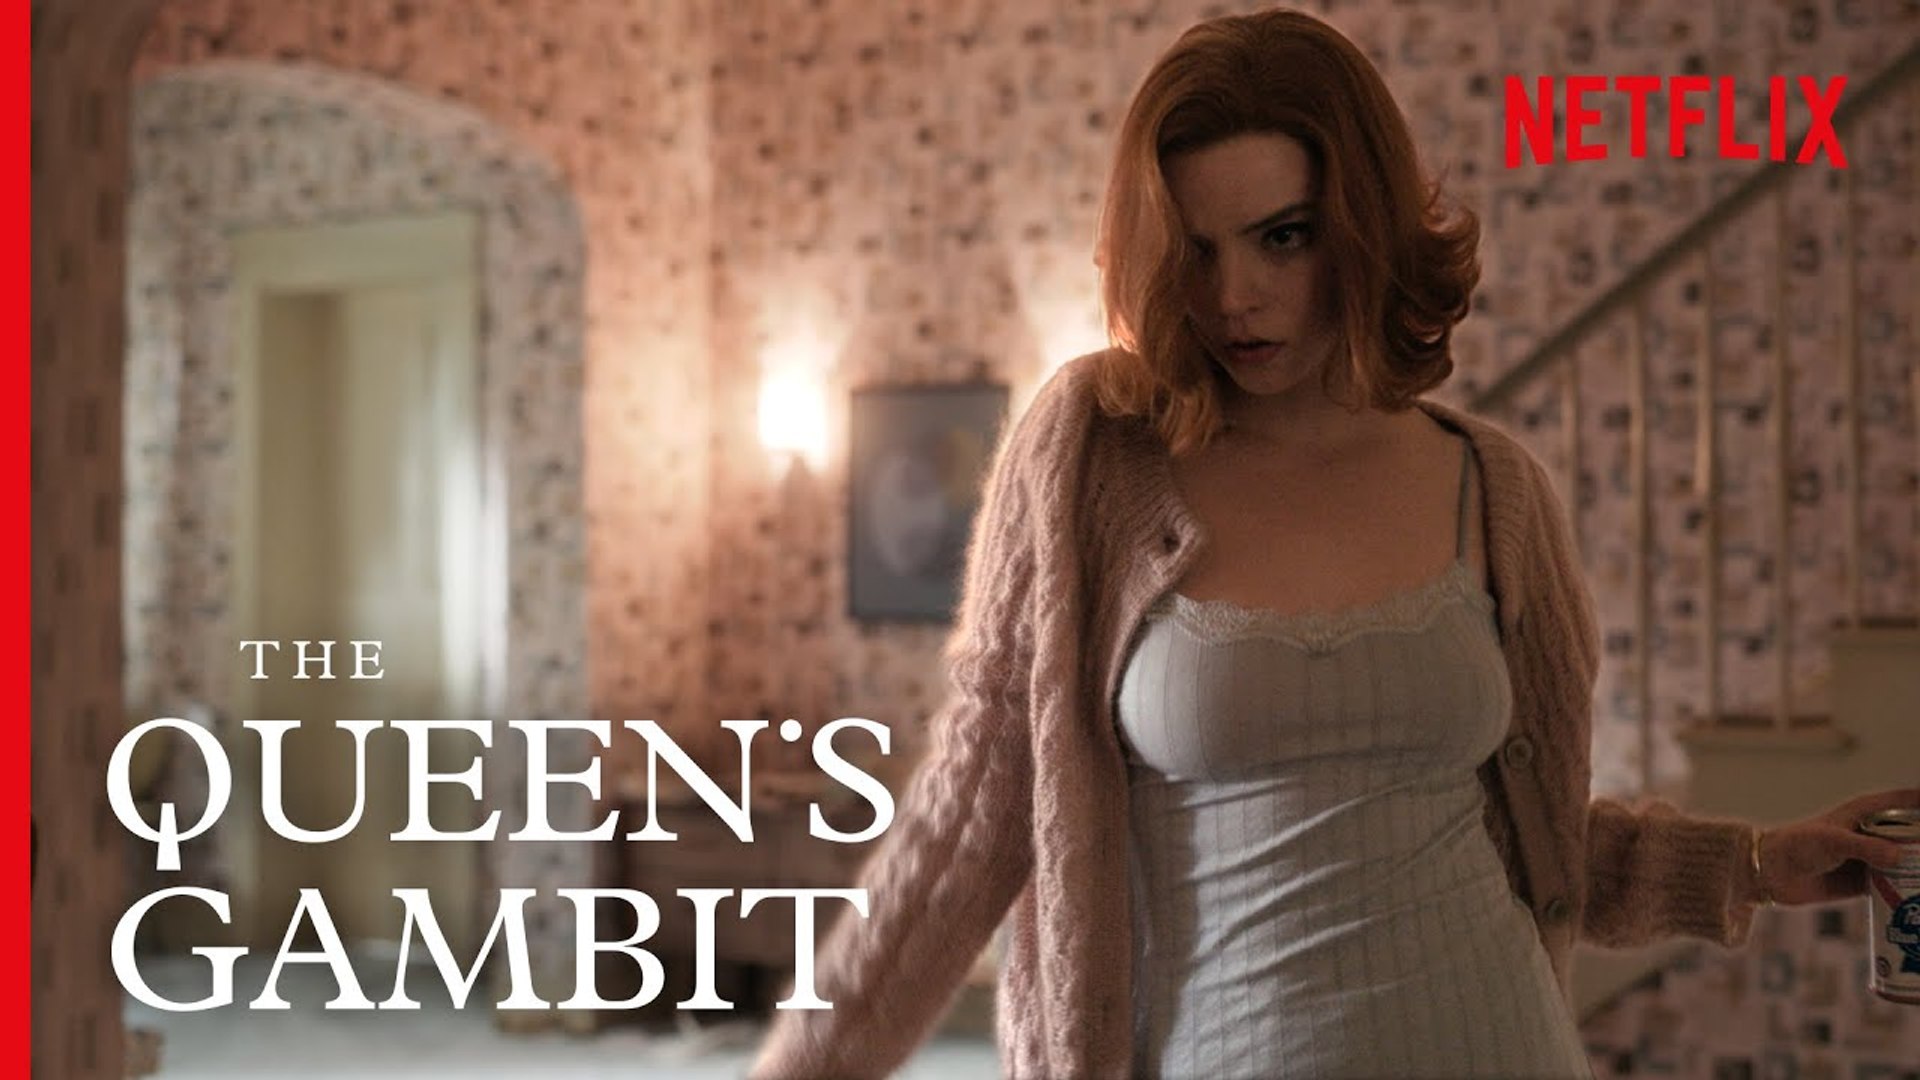 The Queen's Gambit Cast, News, Videos and more